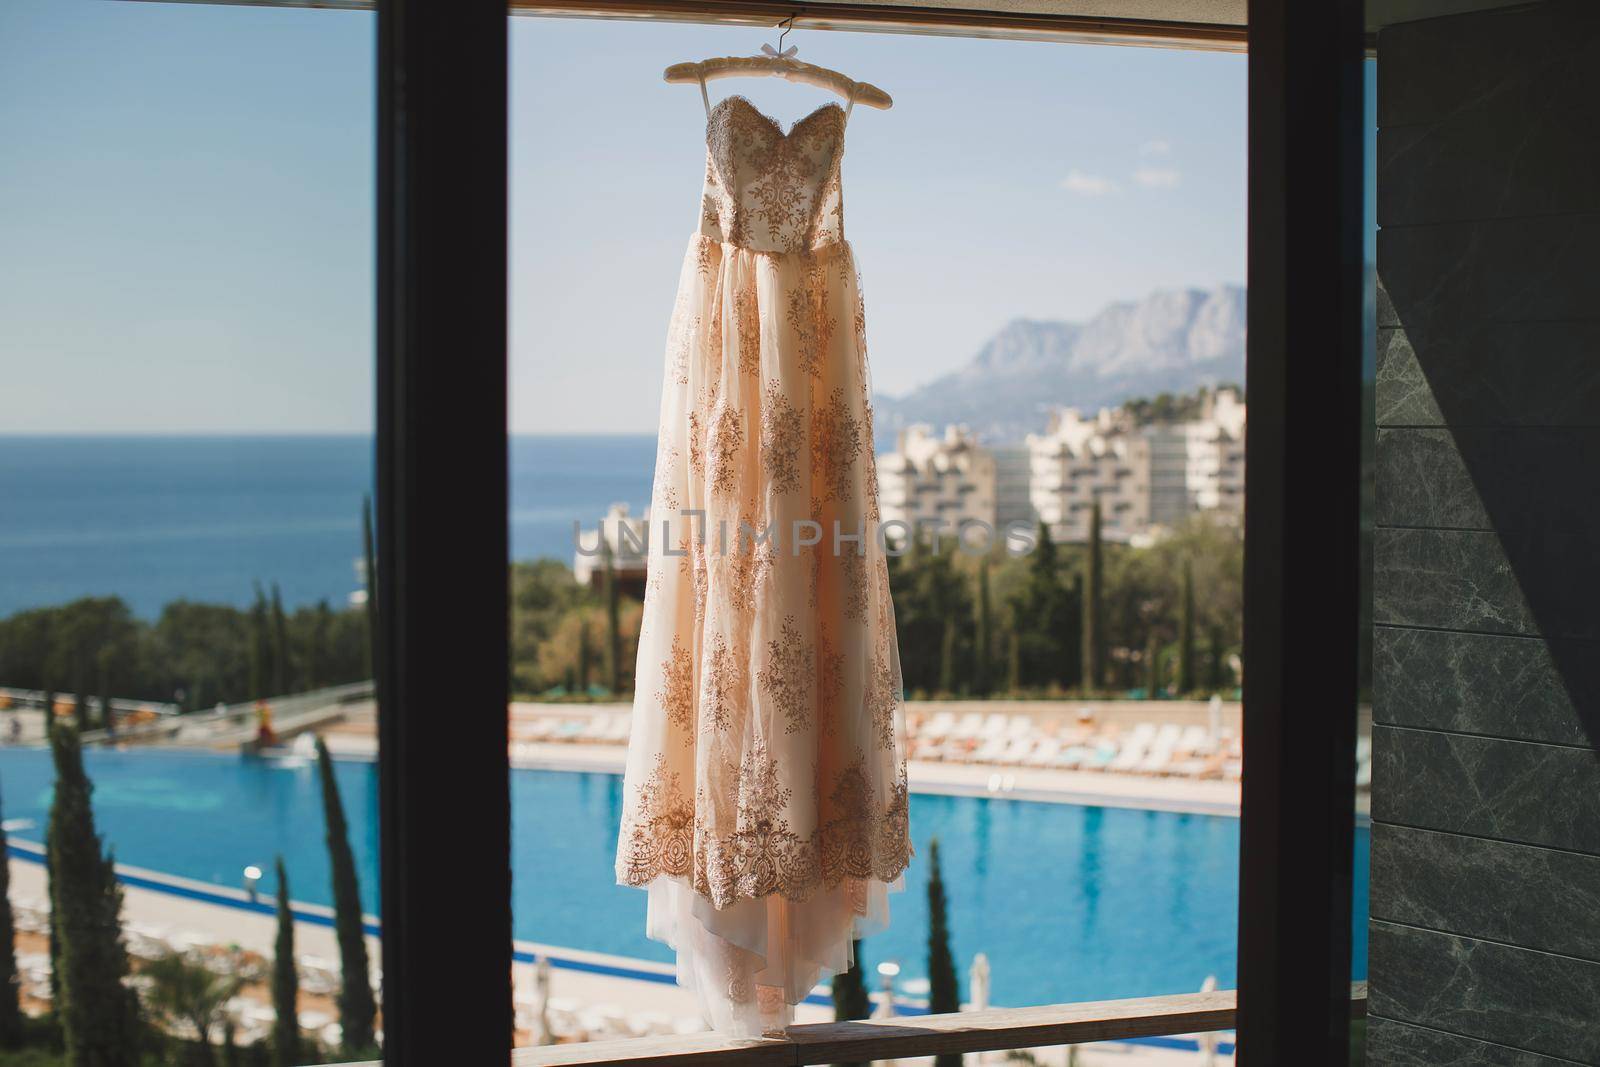 Wedding dress at the hotel on the background of the pool, ocean and mountains by StudioPeace